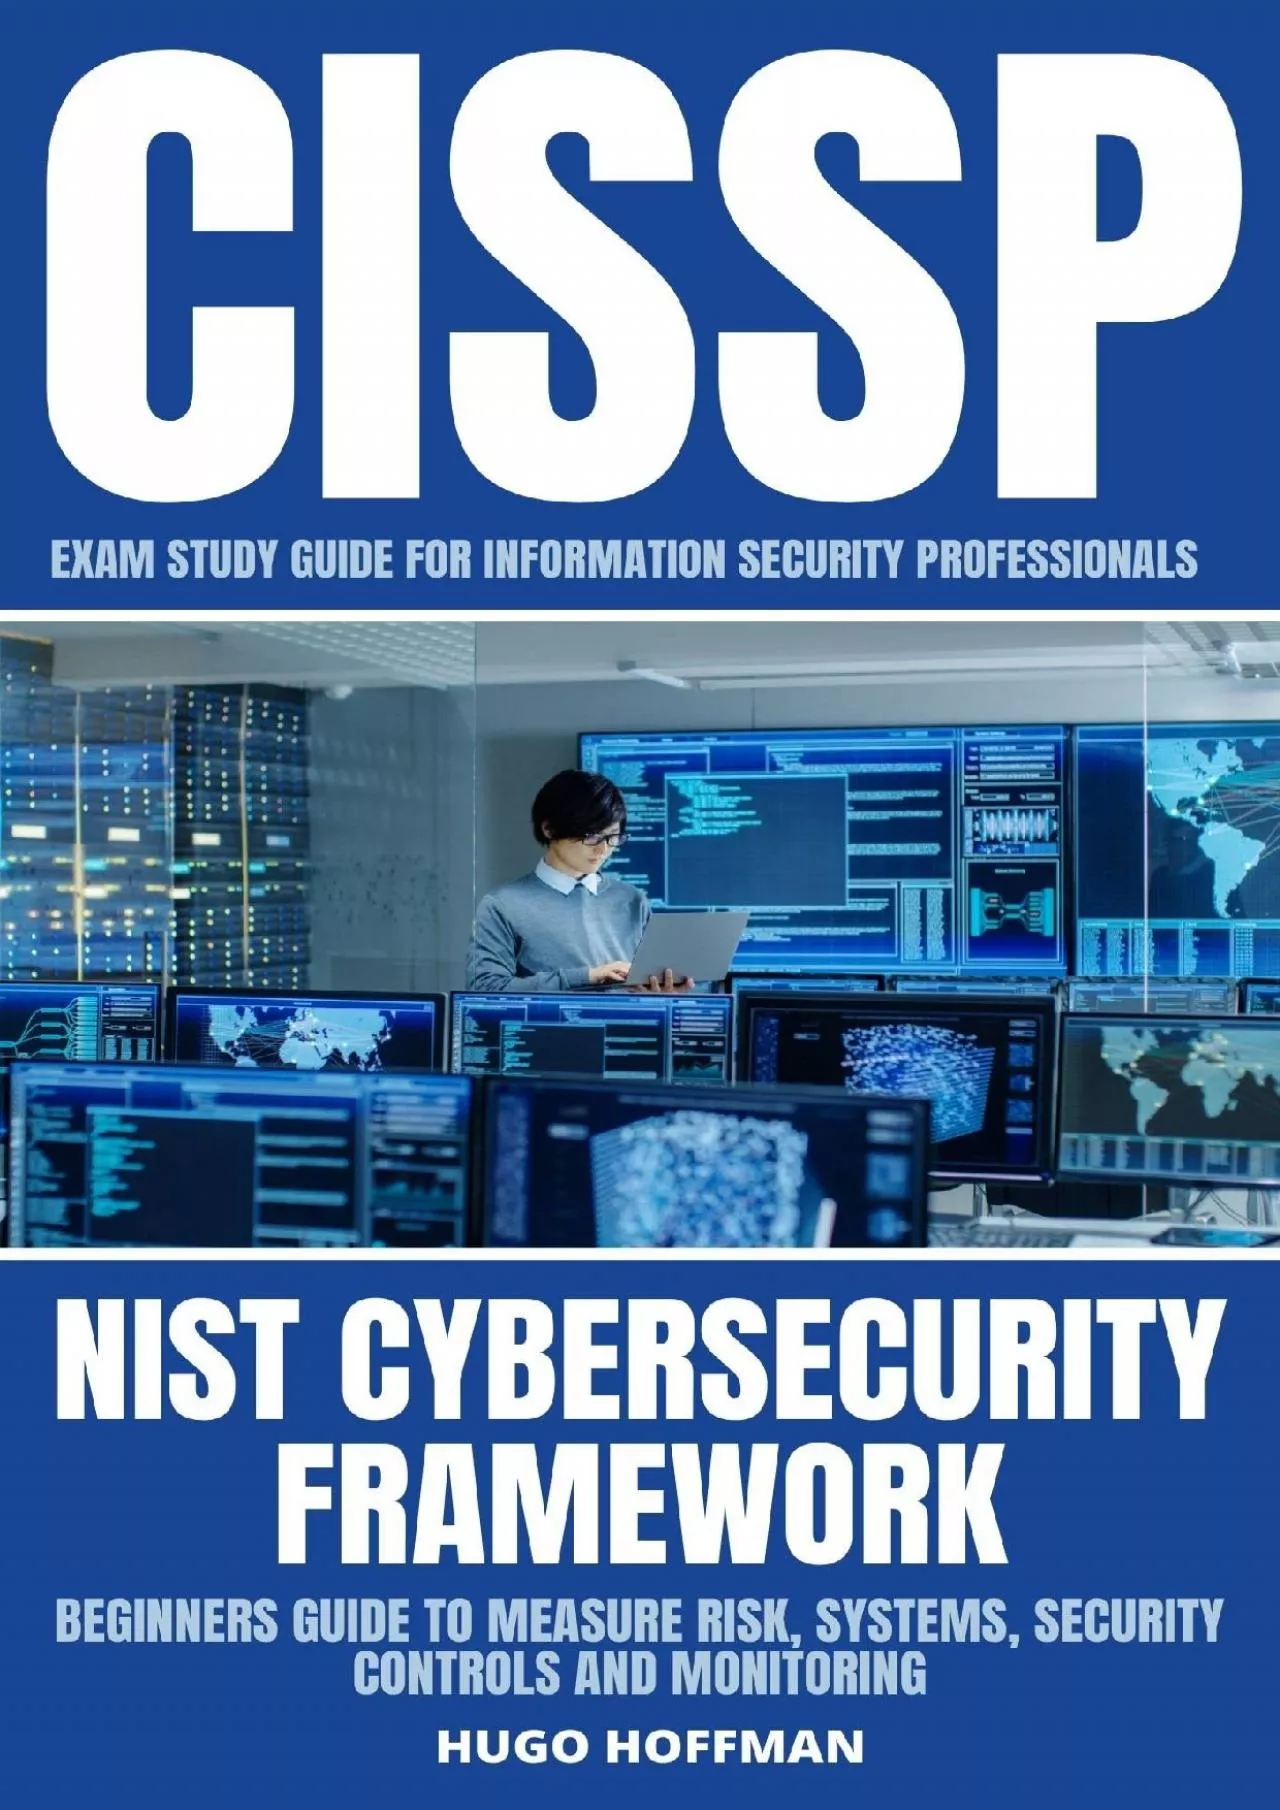 [PDF]-CISSP Exam Study Guide For Information Security Professionals: Nist Cybersecurity